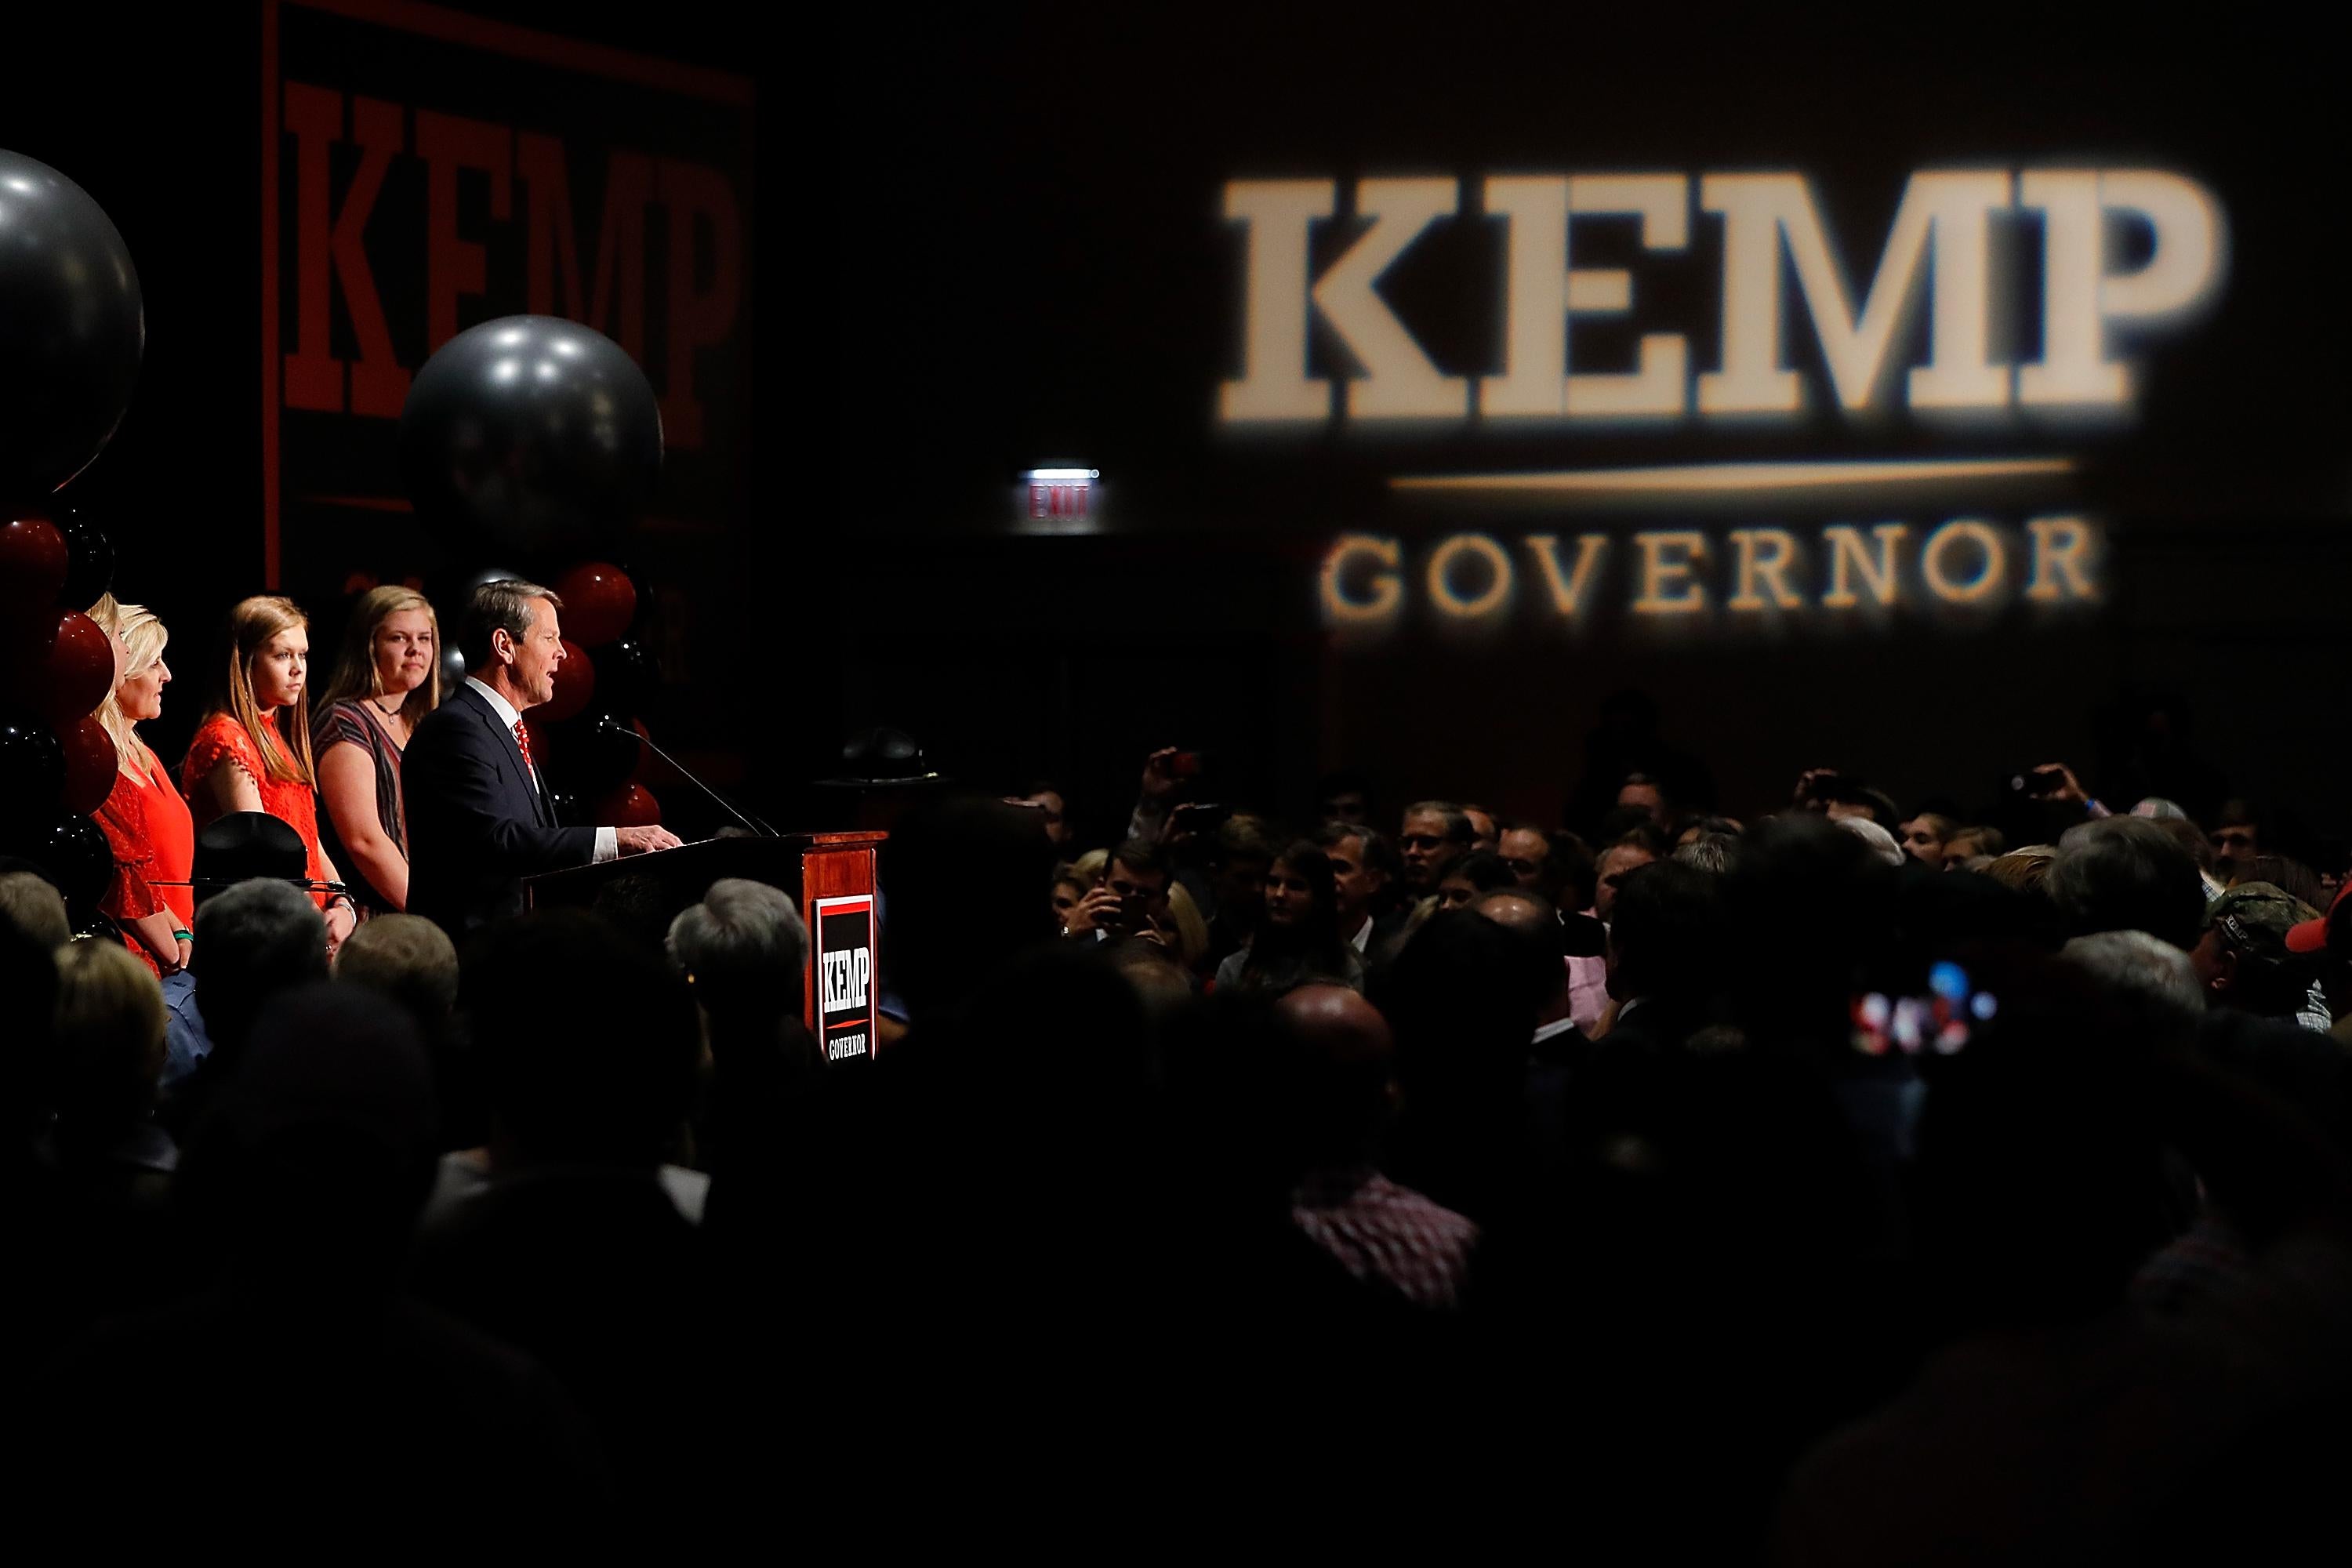 ATHENS, GA - NOVEMBER 06:  Republican gubernatorial candidate Brian Kemp attends the Election Night event at the Classic Center on November 6, 2018 in Athens, Georgia.  Kemp is in a close race with Democrat Stacey Abrams.  (Photo by Kevin C. Cox/Getty Images)